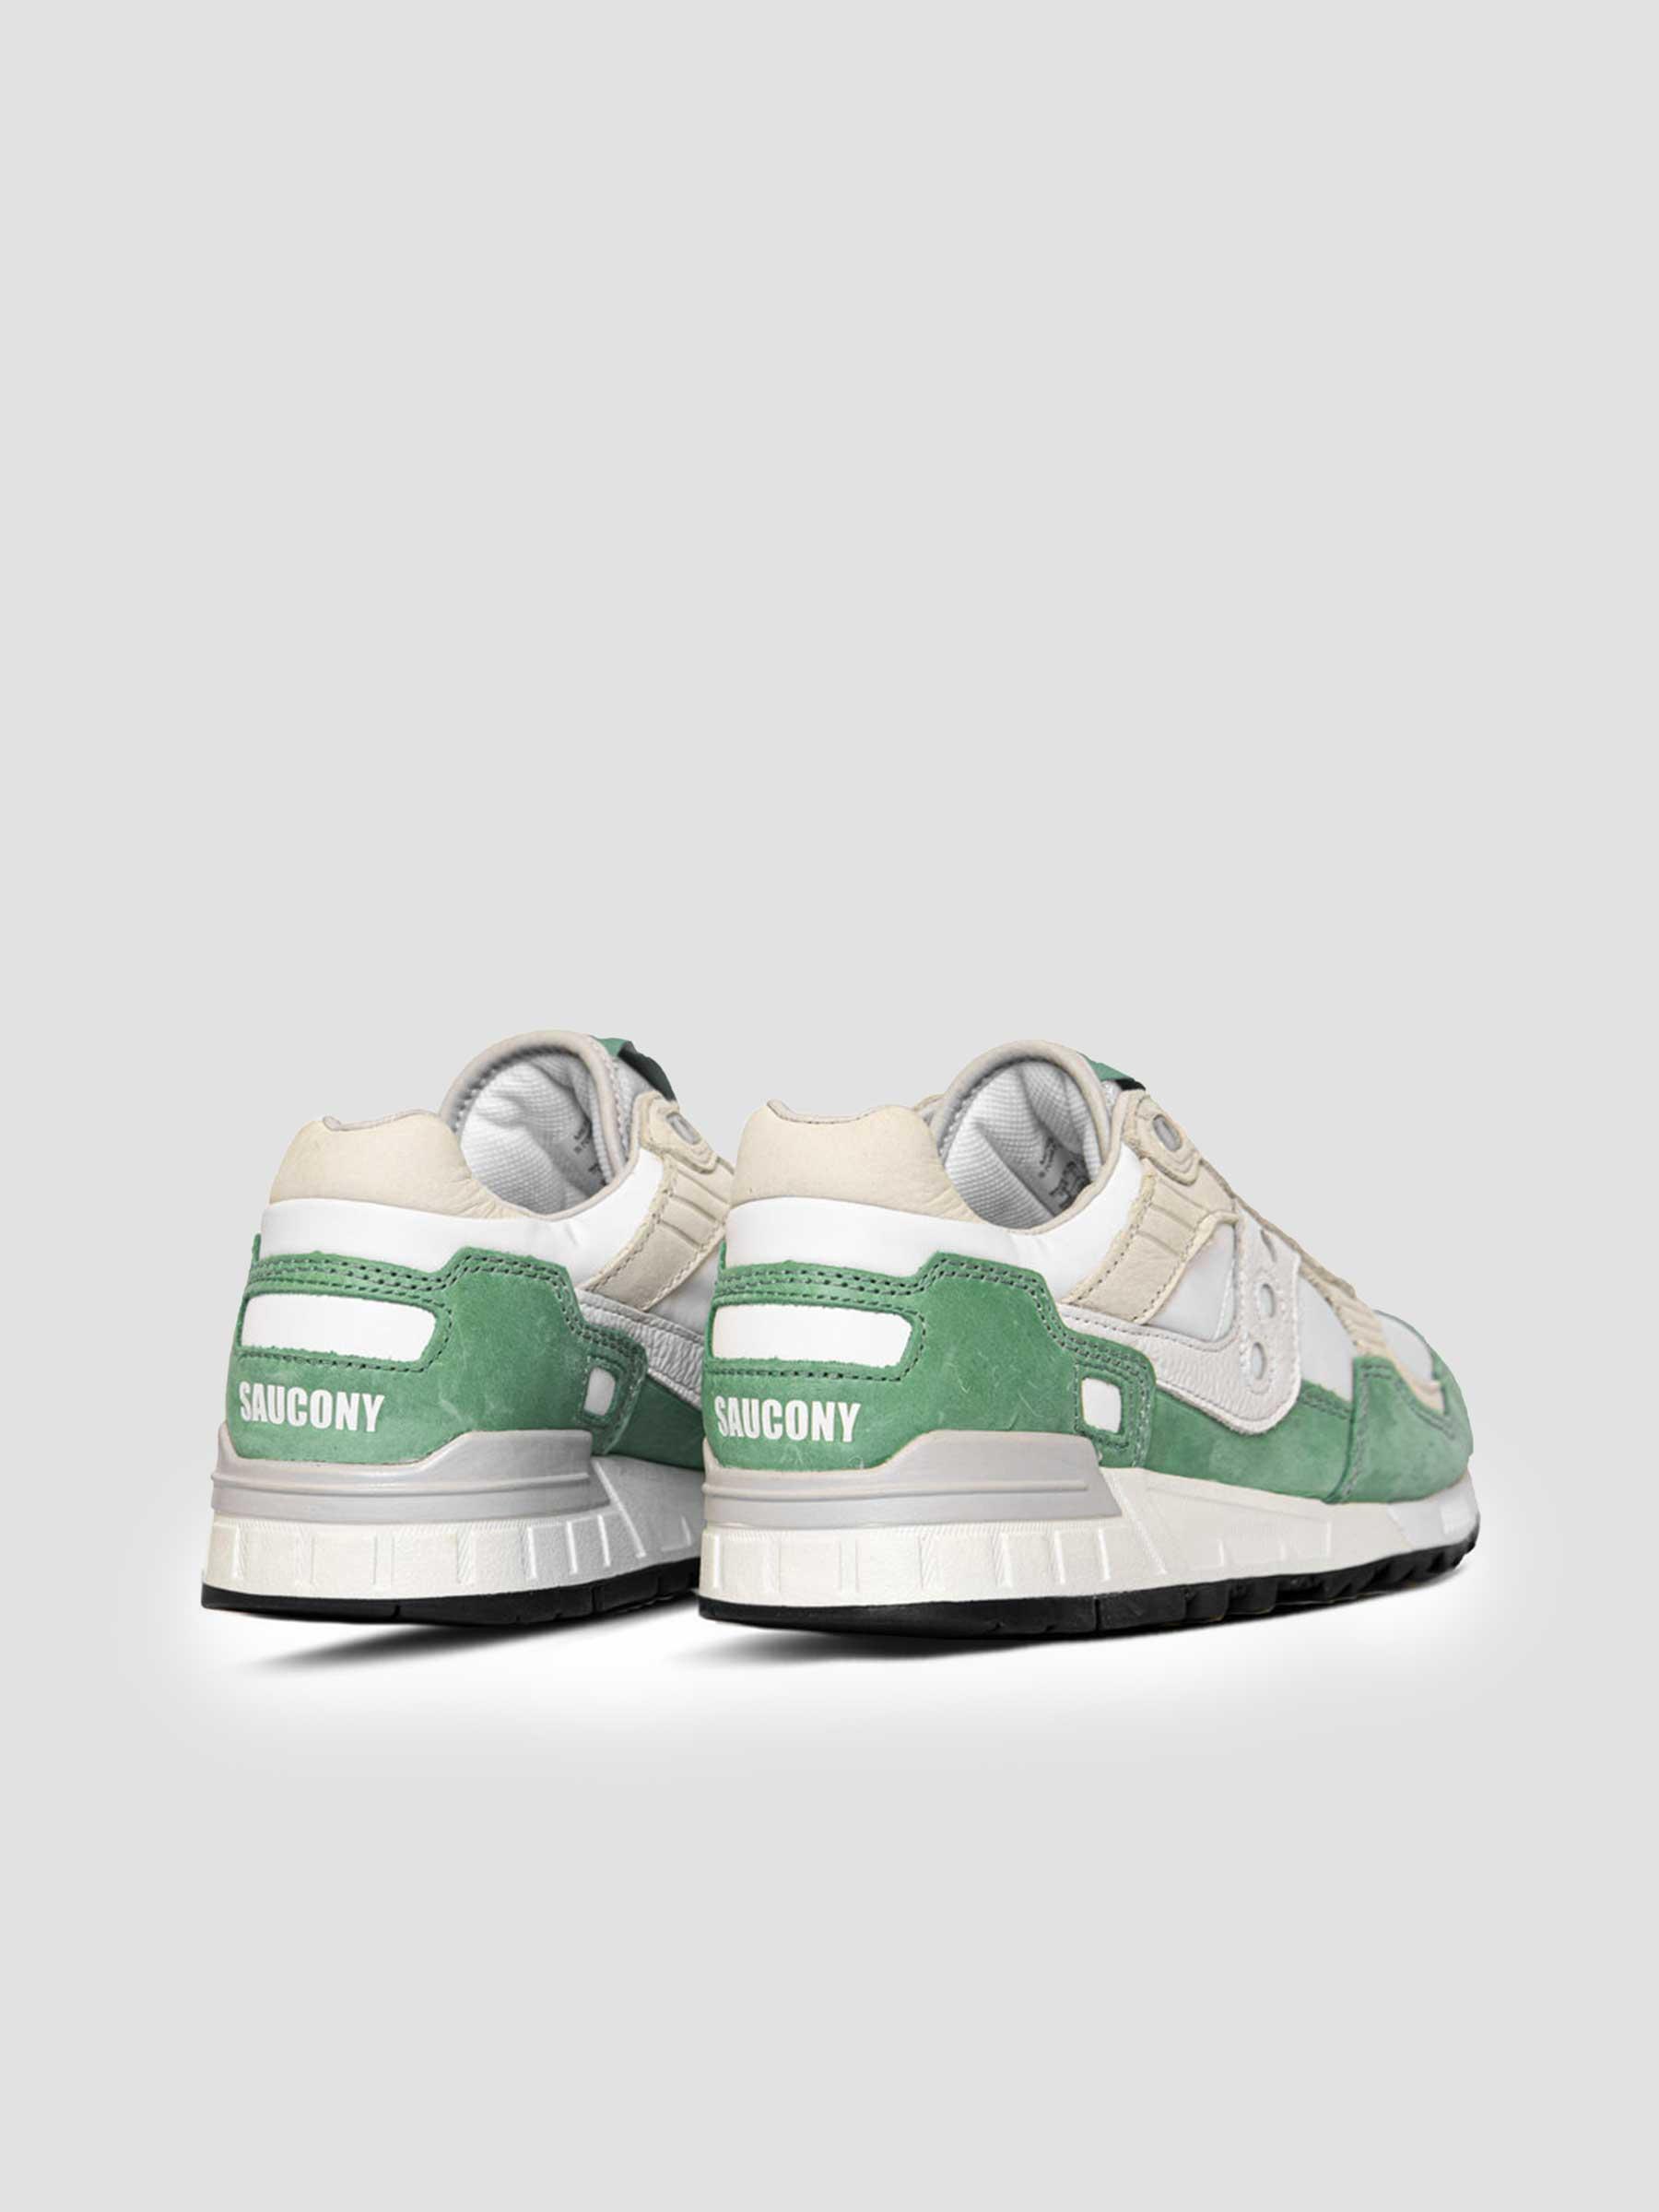 Shadow 5000 White Green S70667-1